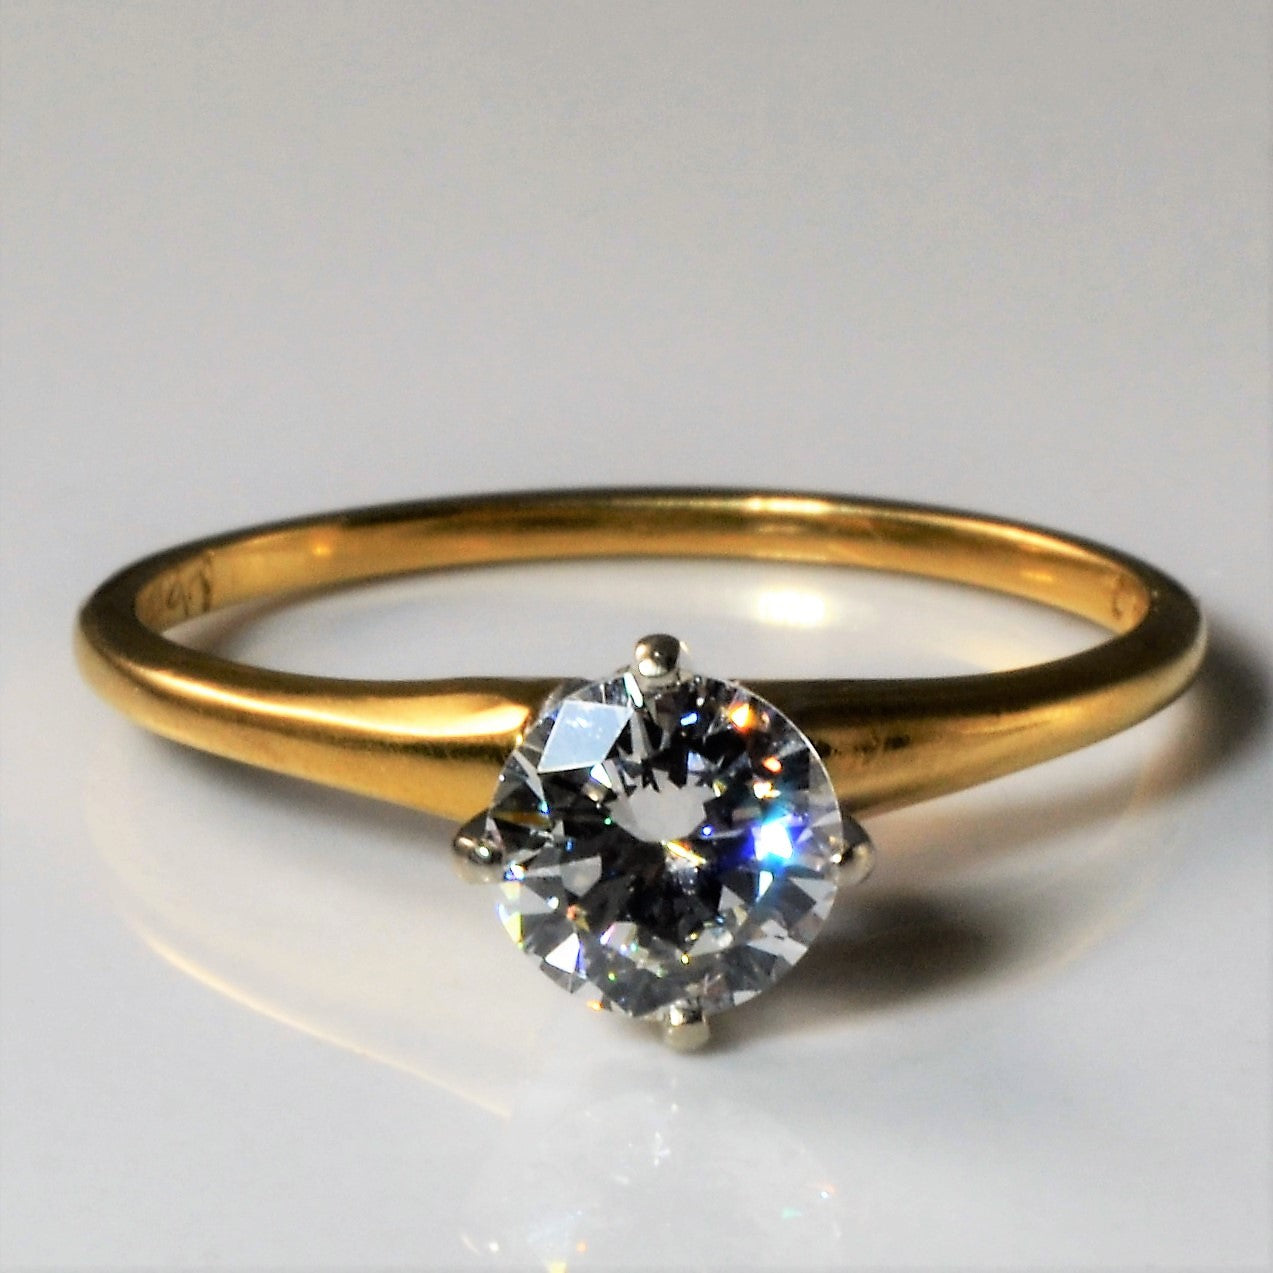 Orange Blossom' Late 1930s Solitaire Engagement Ring | 0.69ct | SZ 7 |